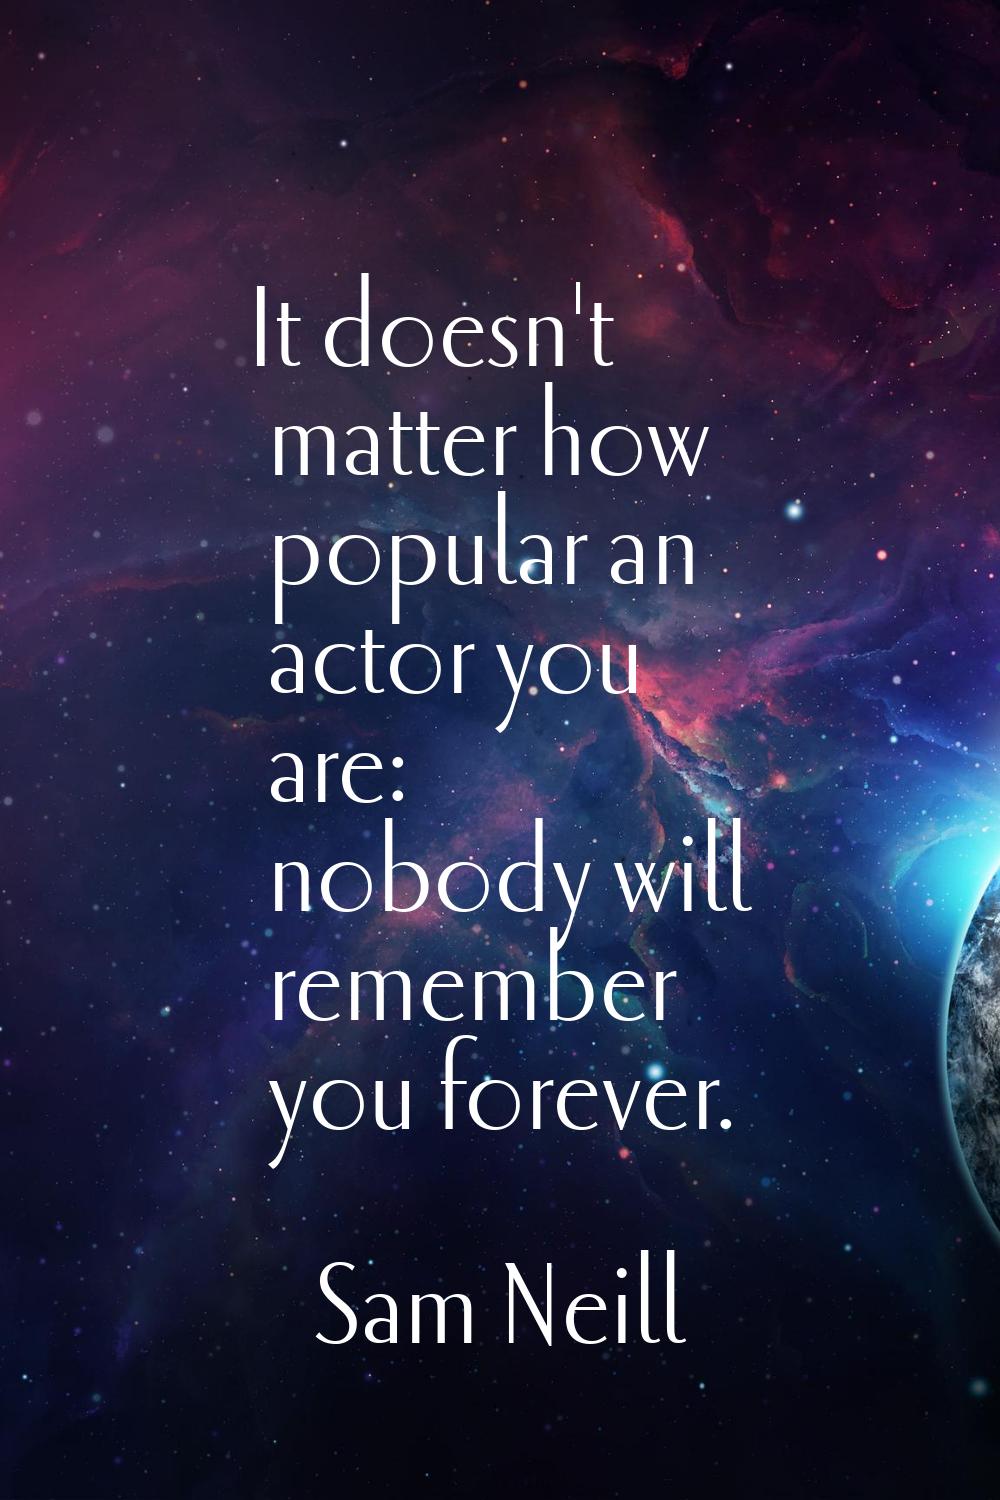 It doesn't matter how popular an actor you are: nobody will remember you forever.